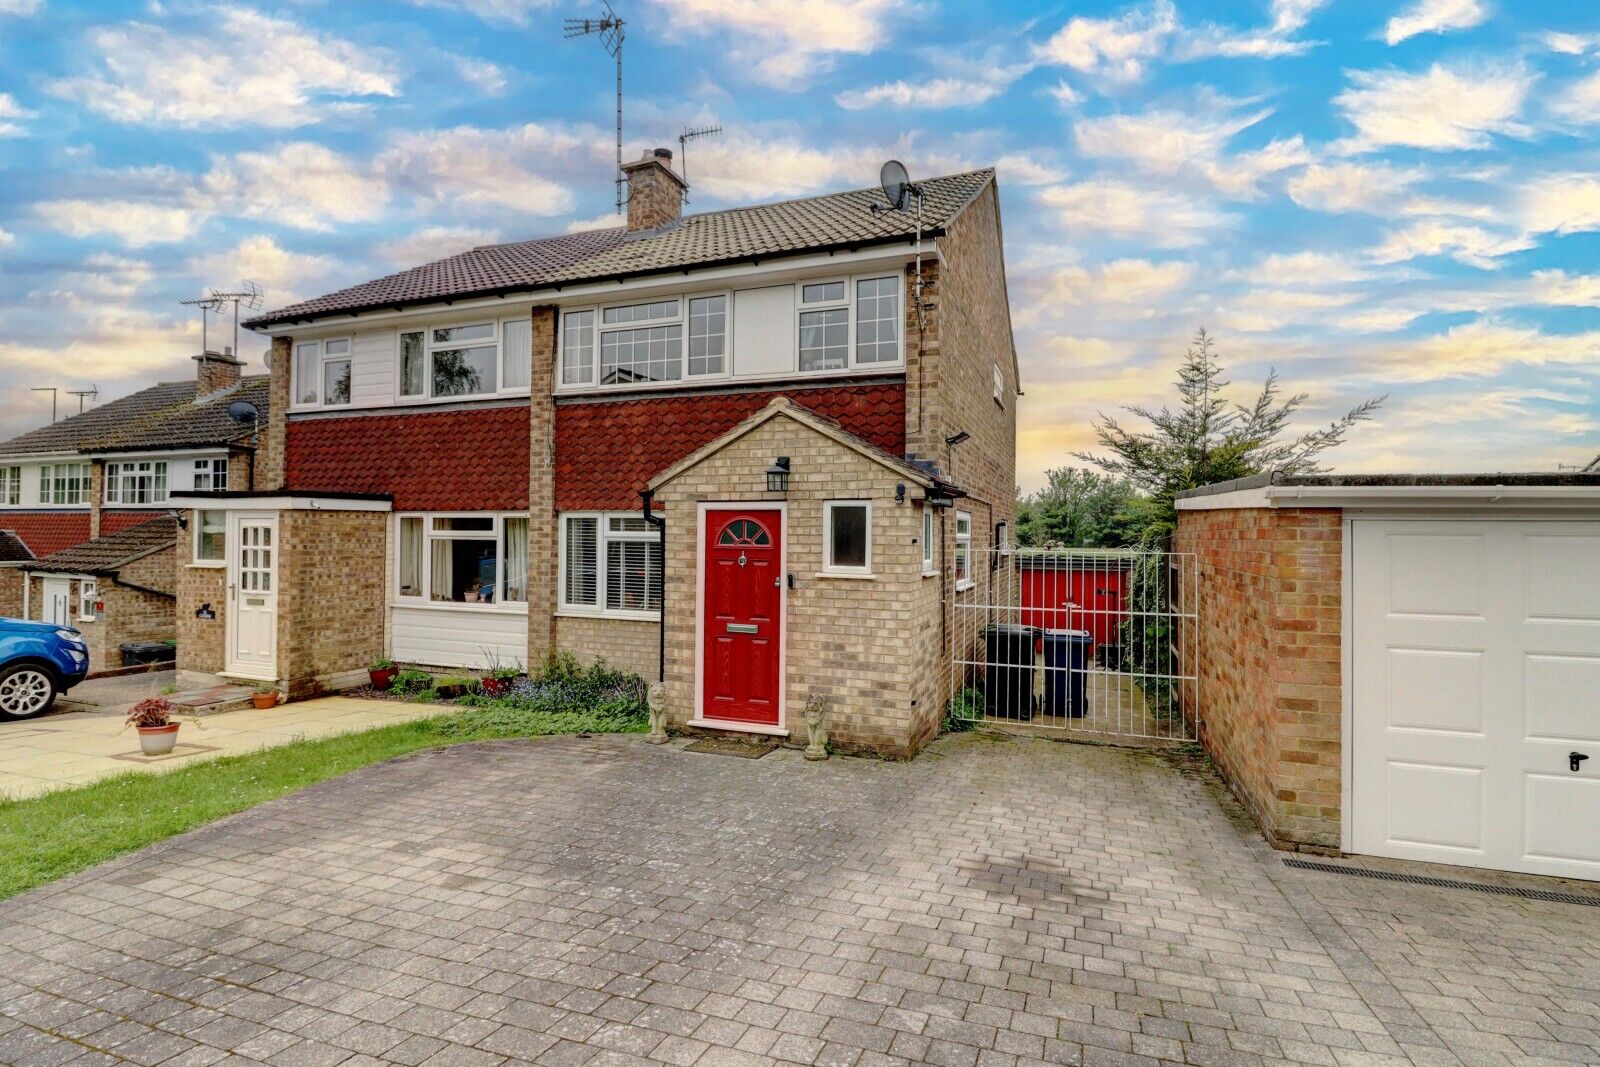 3 bedroom semi detached house for sale Robinson Road, High Wycombe, HP13, main image